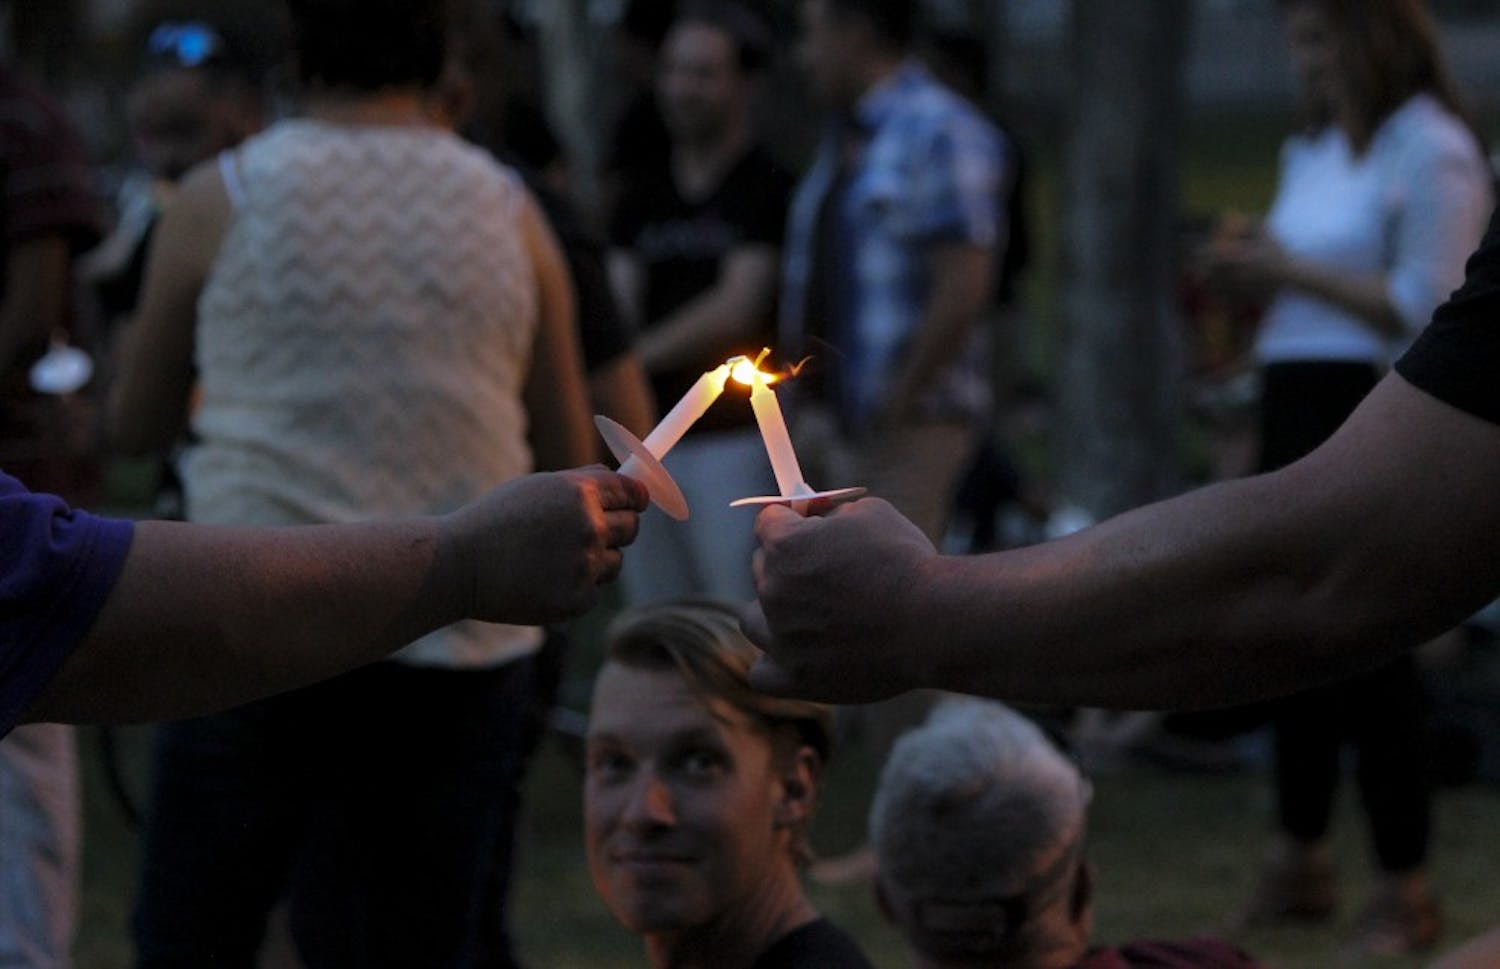 Candlelight Vigil participants light each other's candles as they honor the lives lost within the LGBTQ community at Morningside Park on June 8, 2017. The Candlelight Vigil featured talks from key leaders in the LGBTQ community.